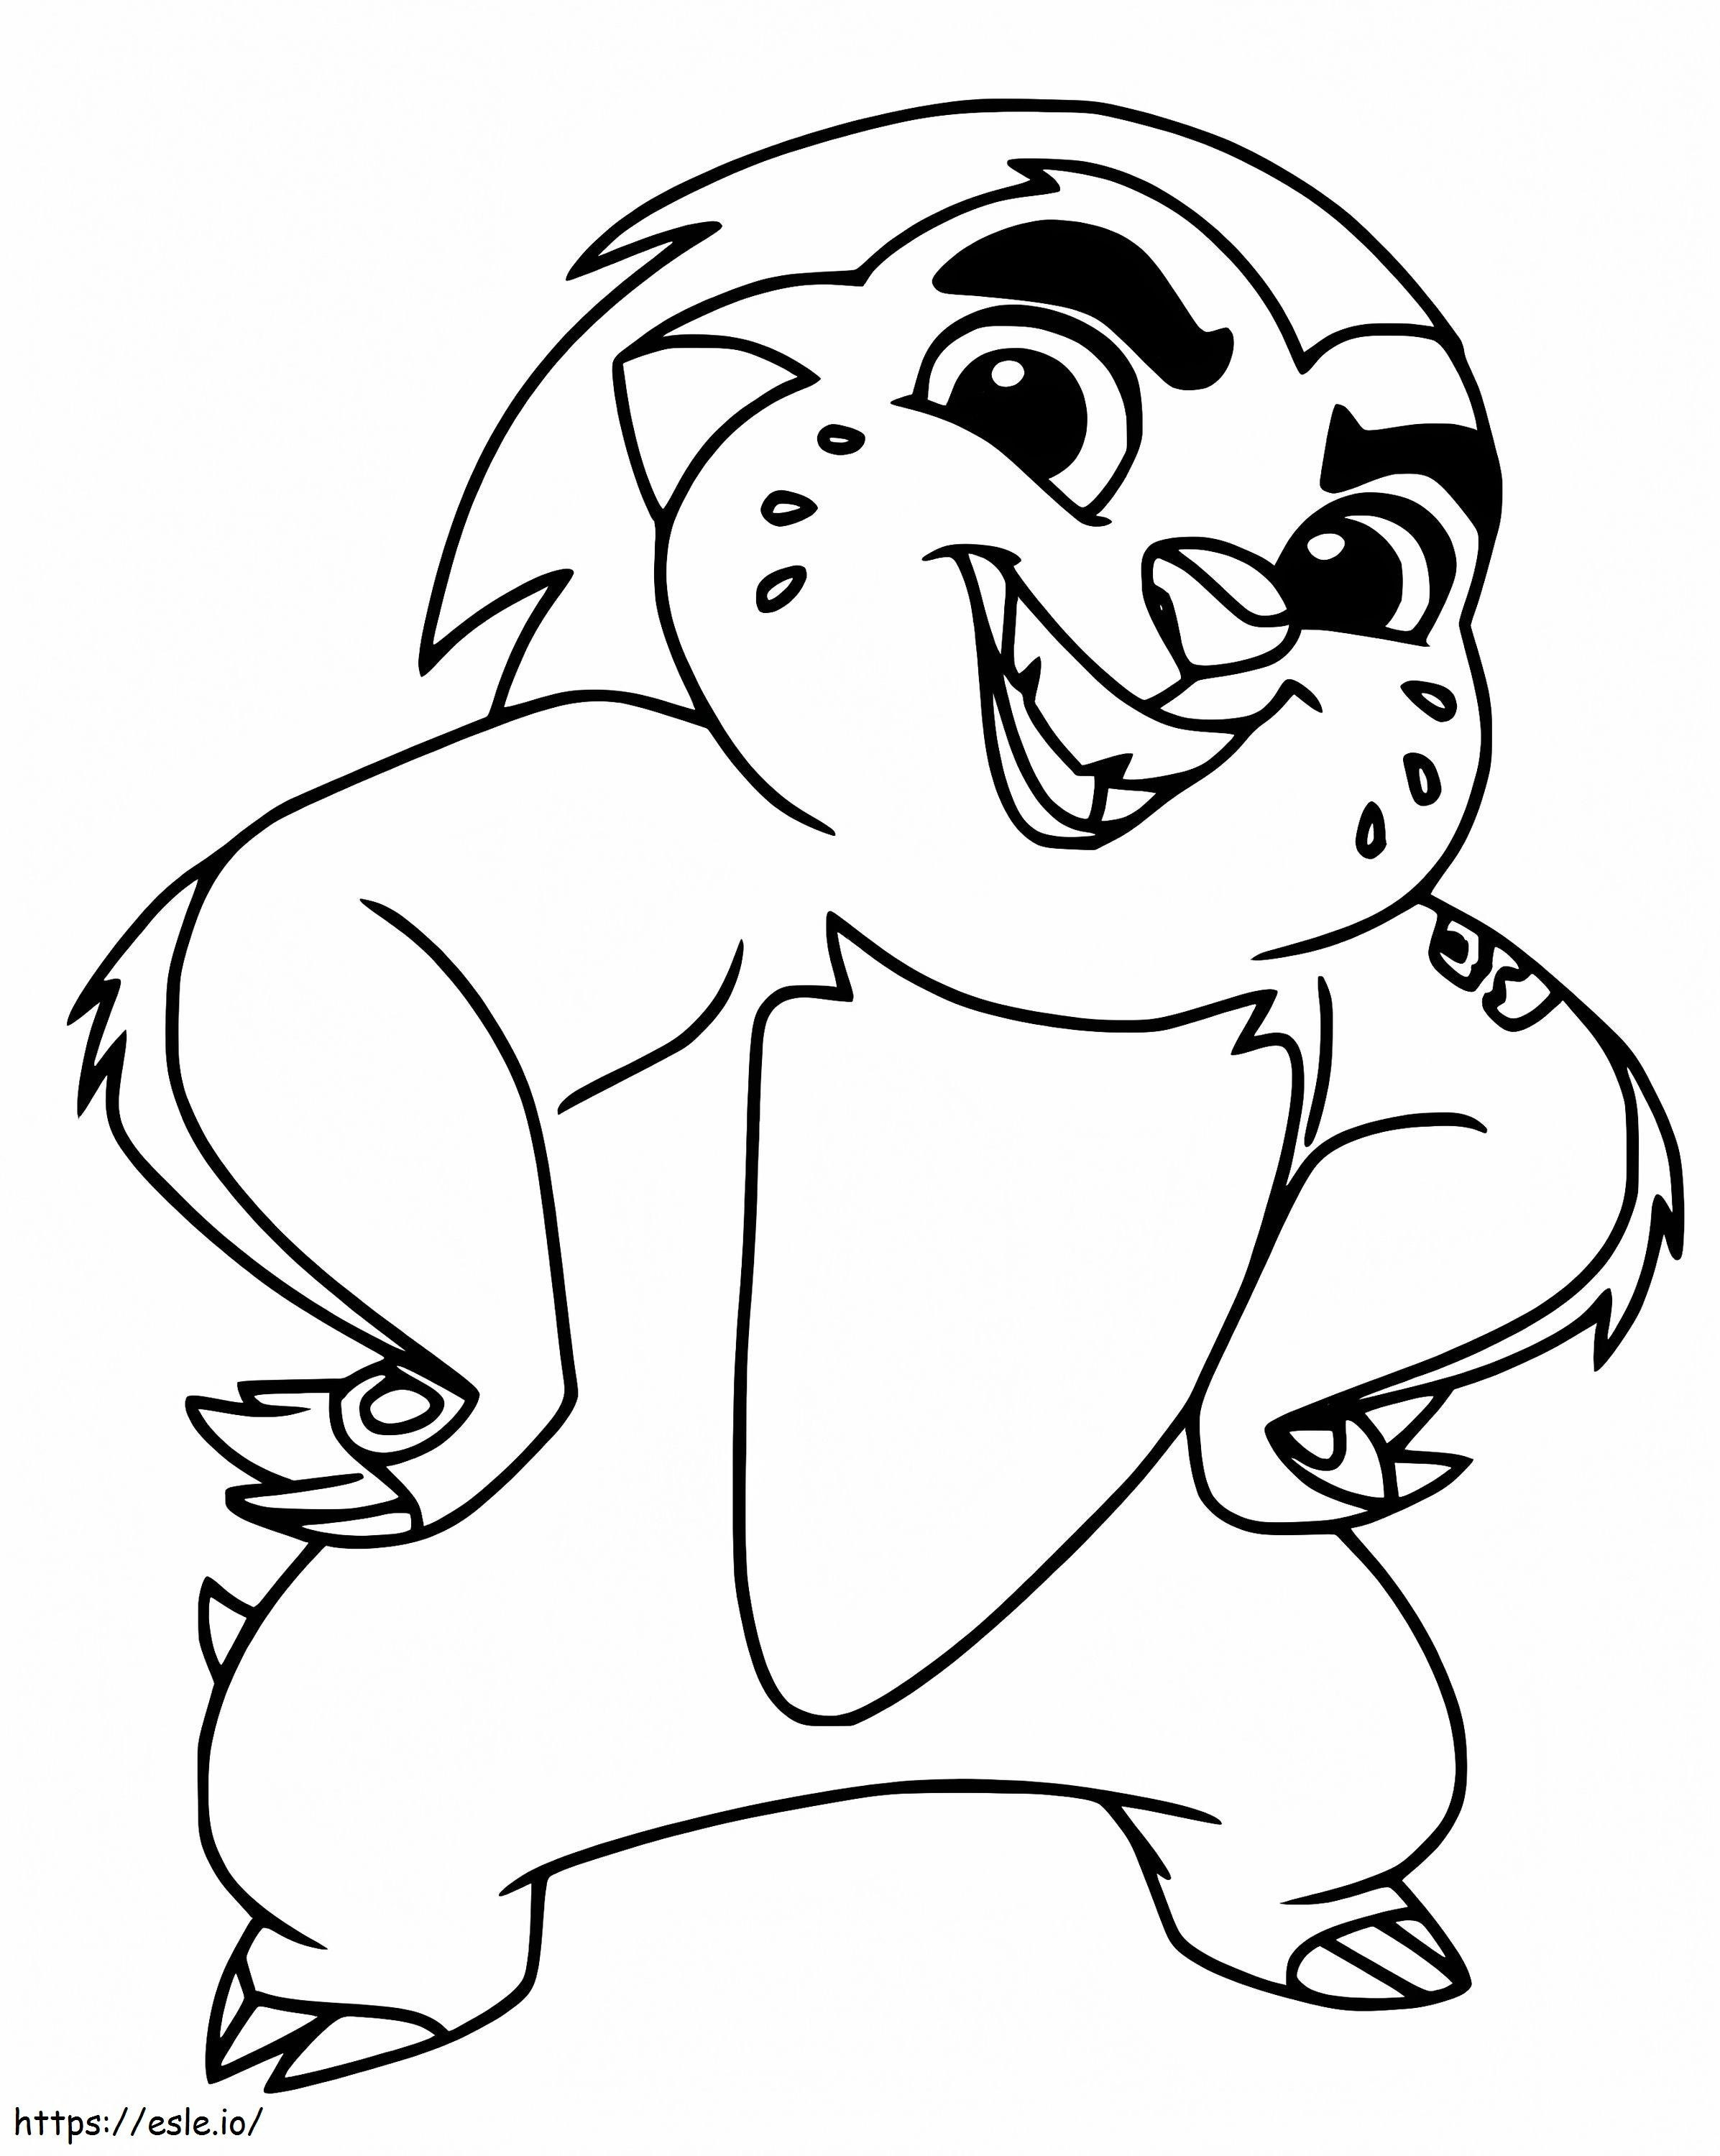 Bunga The Lion Guard coloring page